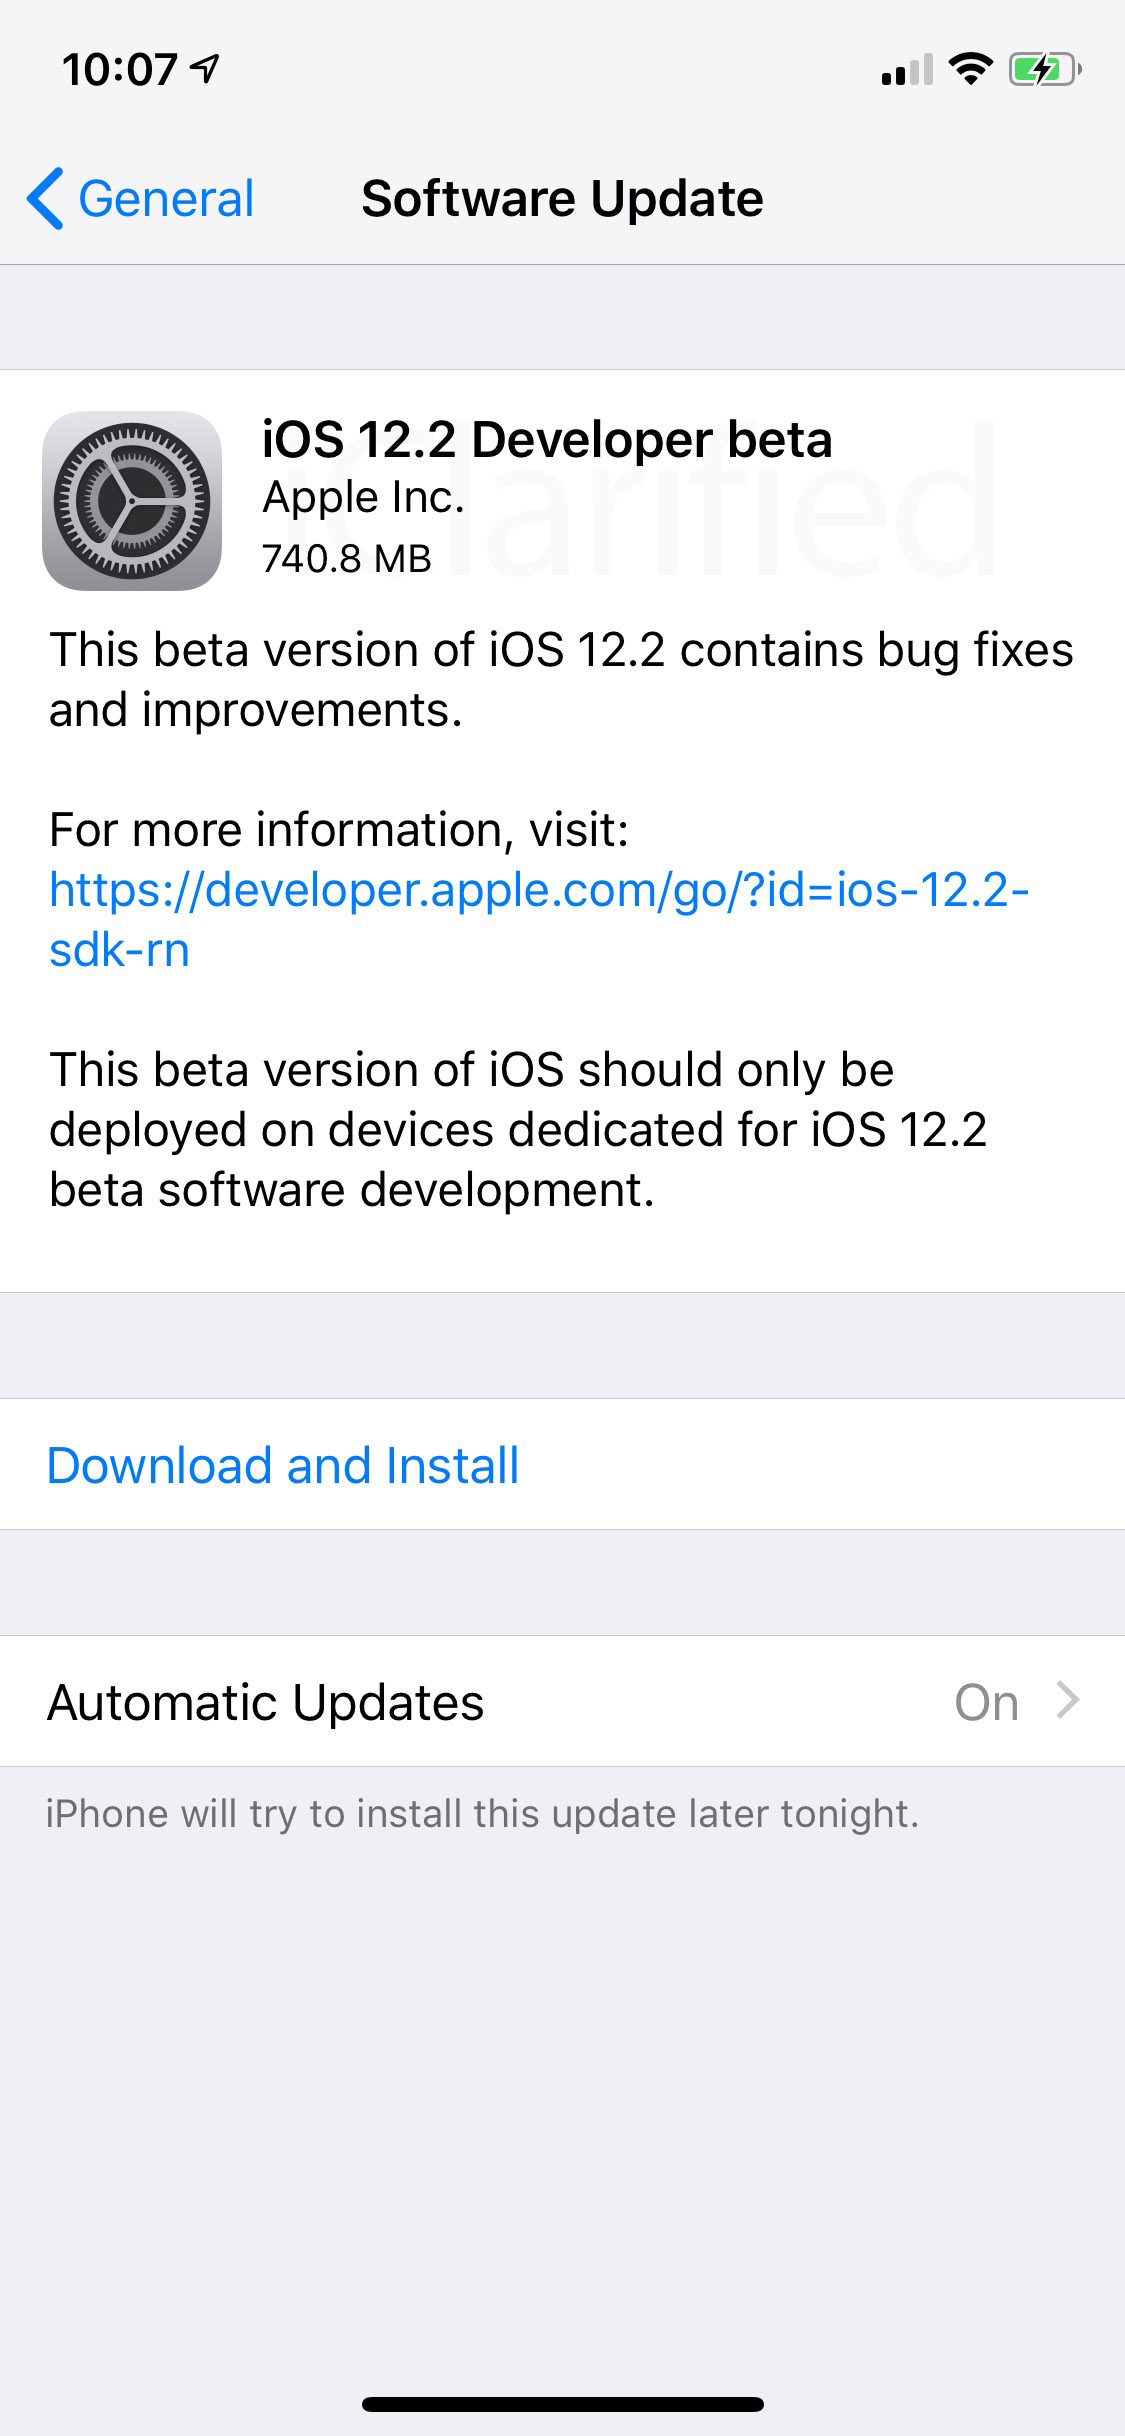 Apple Releases iOS 12.2 Beta to Developers [Download]